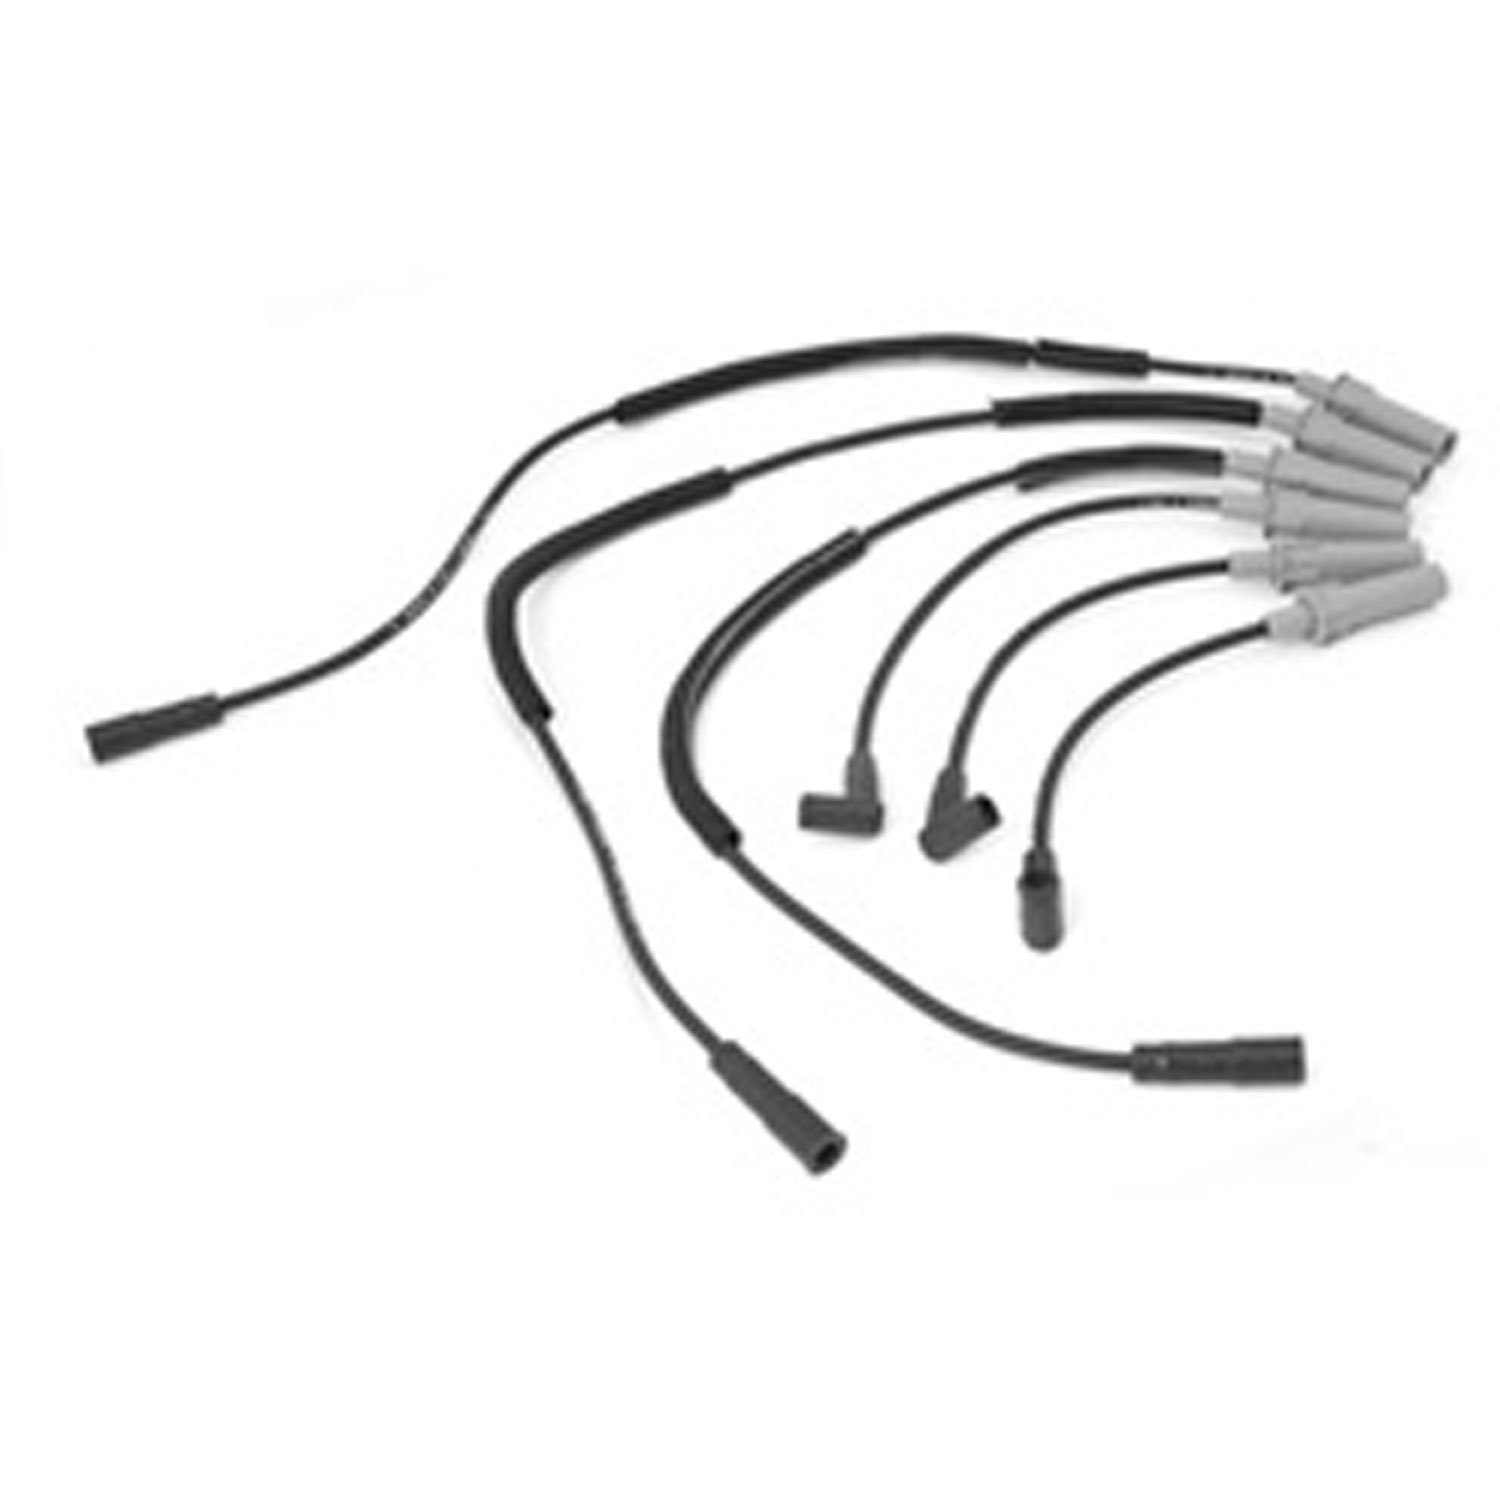 This ignition wire set from Omix-ADA fits the 3.8L engine found in 07-11 Jeep Wranglers.